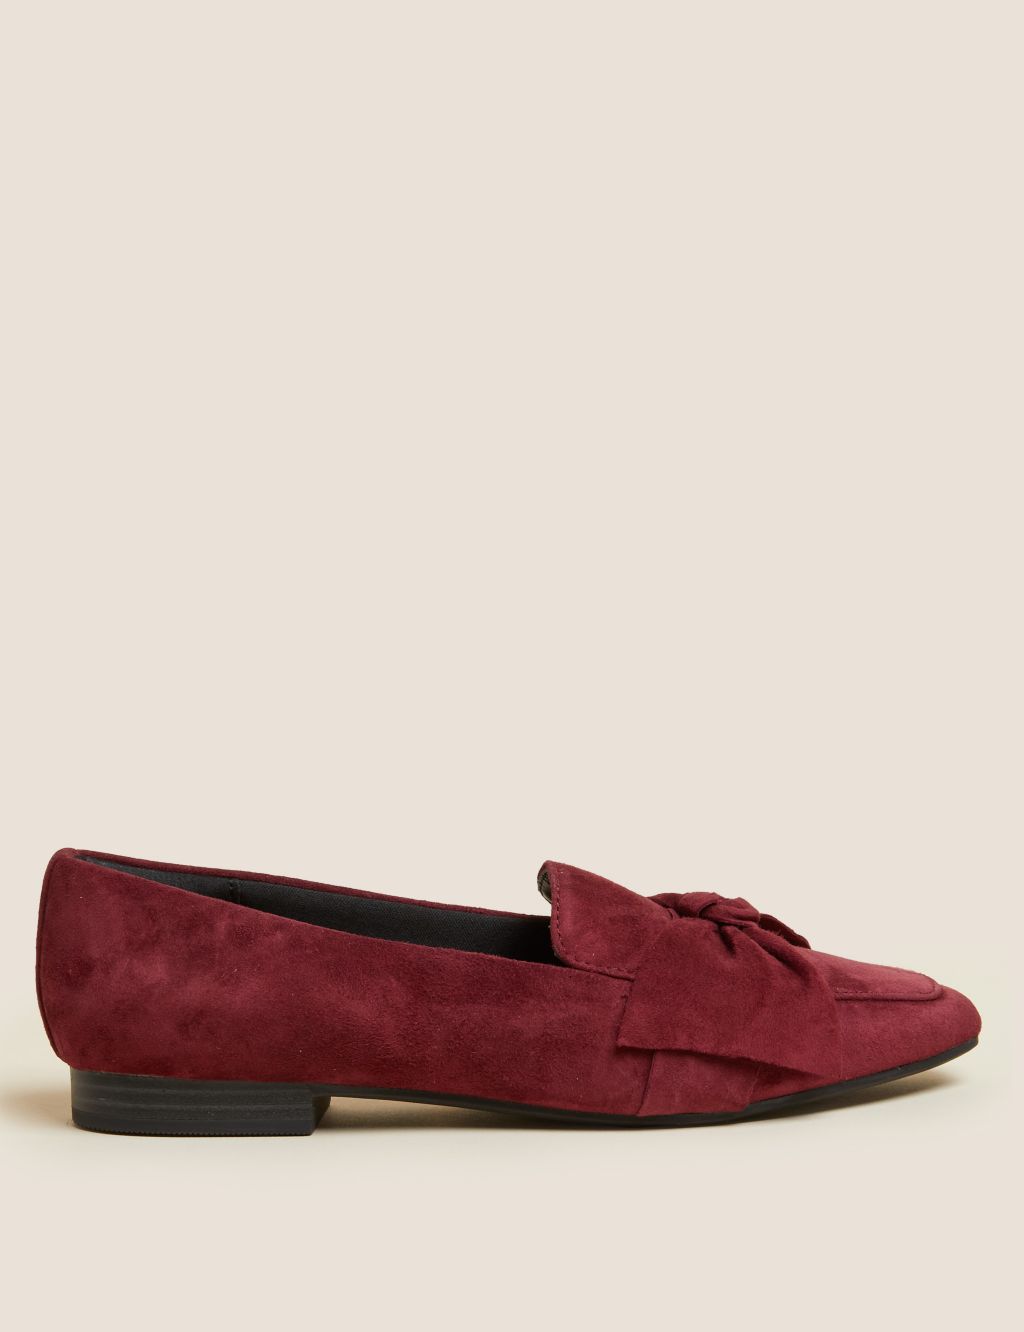 Suede Bow Flat Square Toe Loafers | M&S Collection | M&S